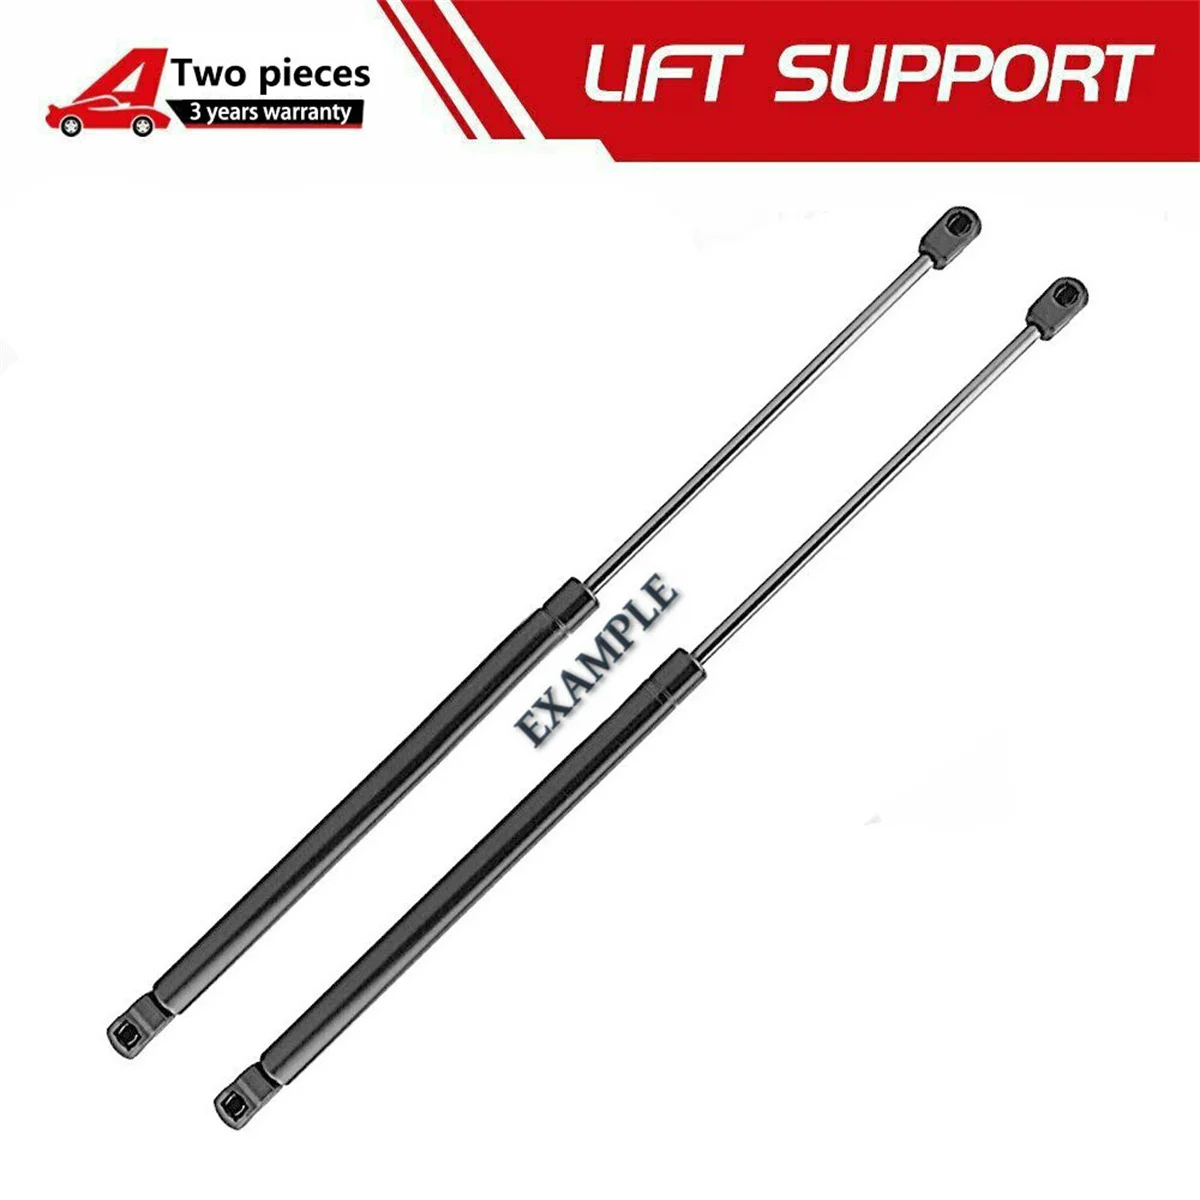 

Liftgate Tailgate Hatch Struts Shocks For 2007 2008 2009 2010 2011 Honda CRV Lift Supports Pair Extended Length [in] 24.62